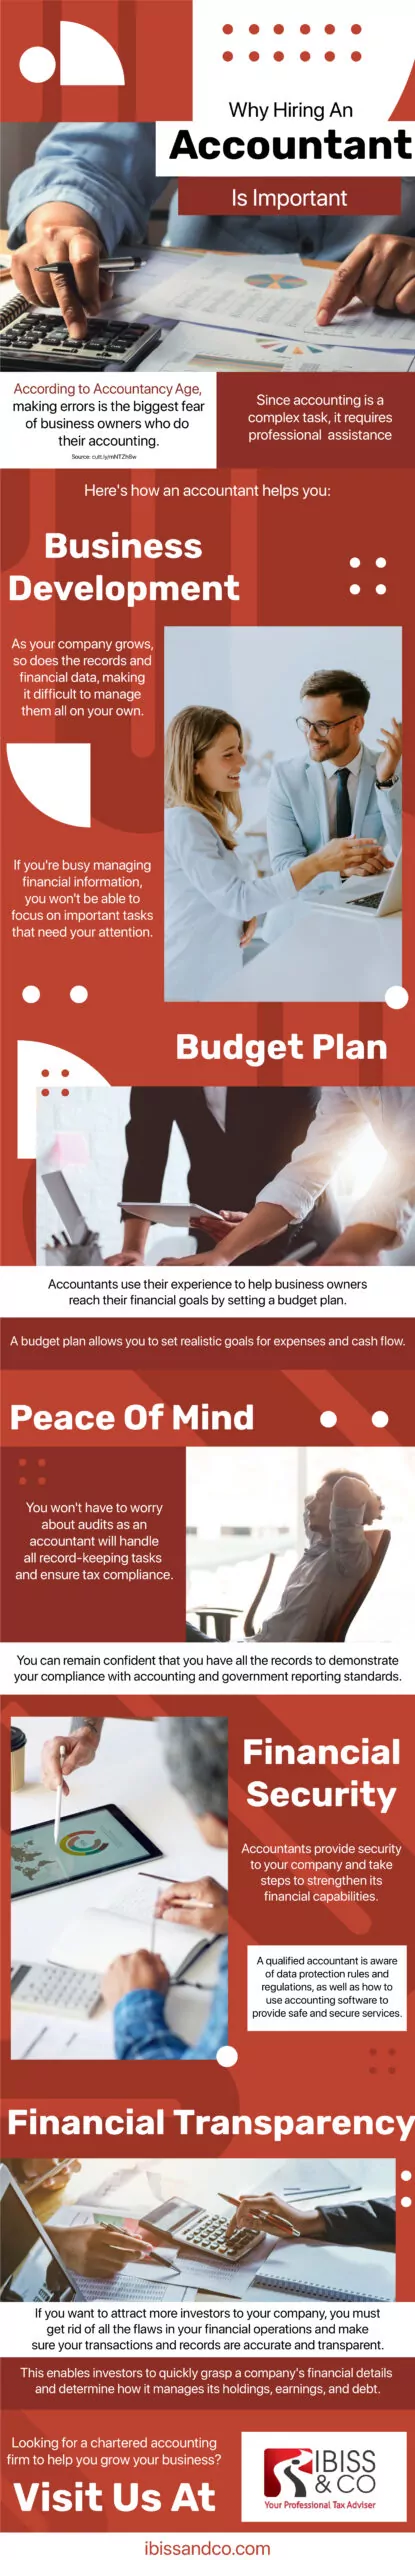 Why Hiring An Accountant Is Important-INFOGRAPHIC